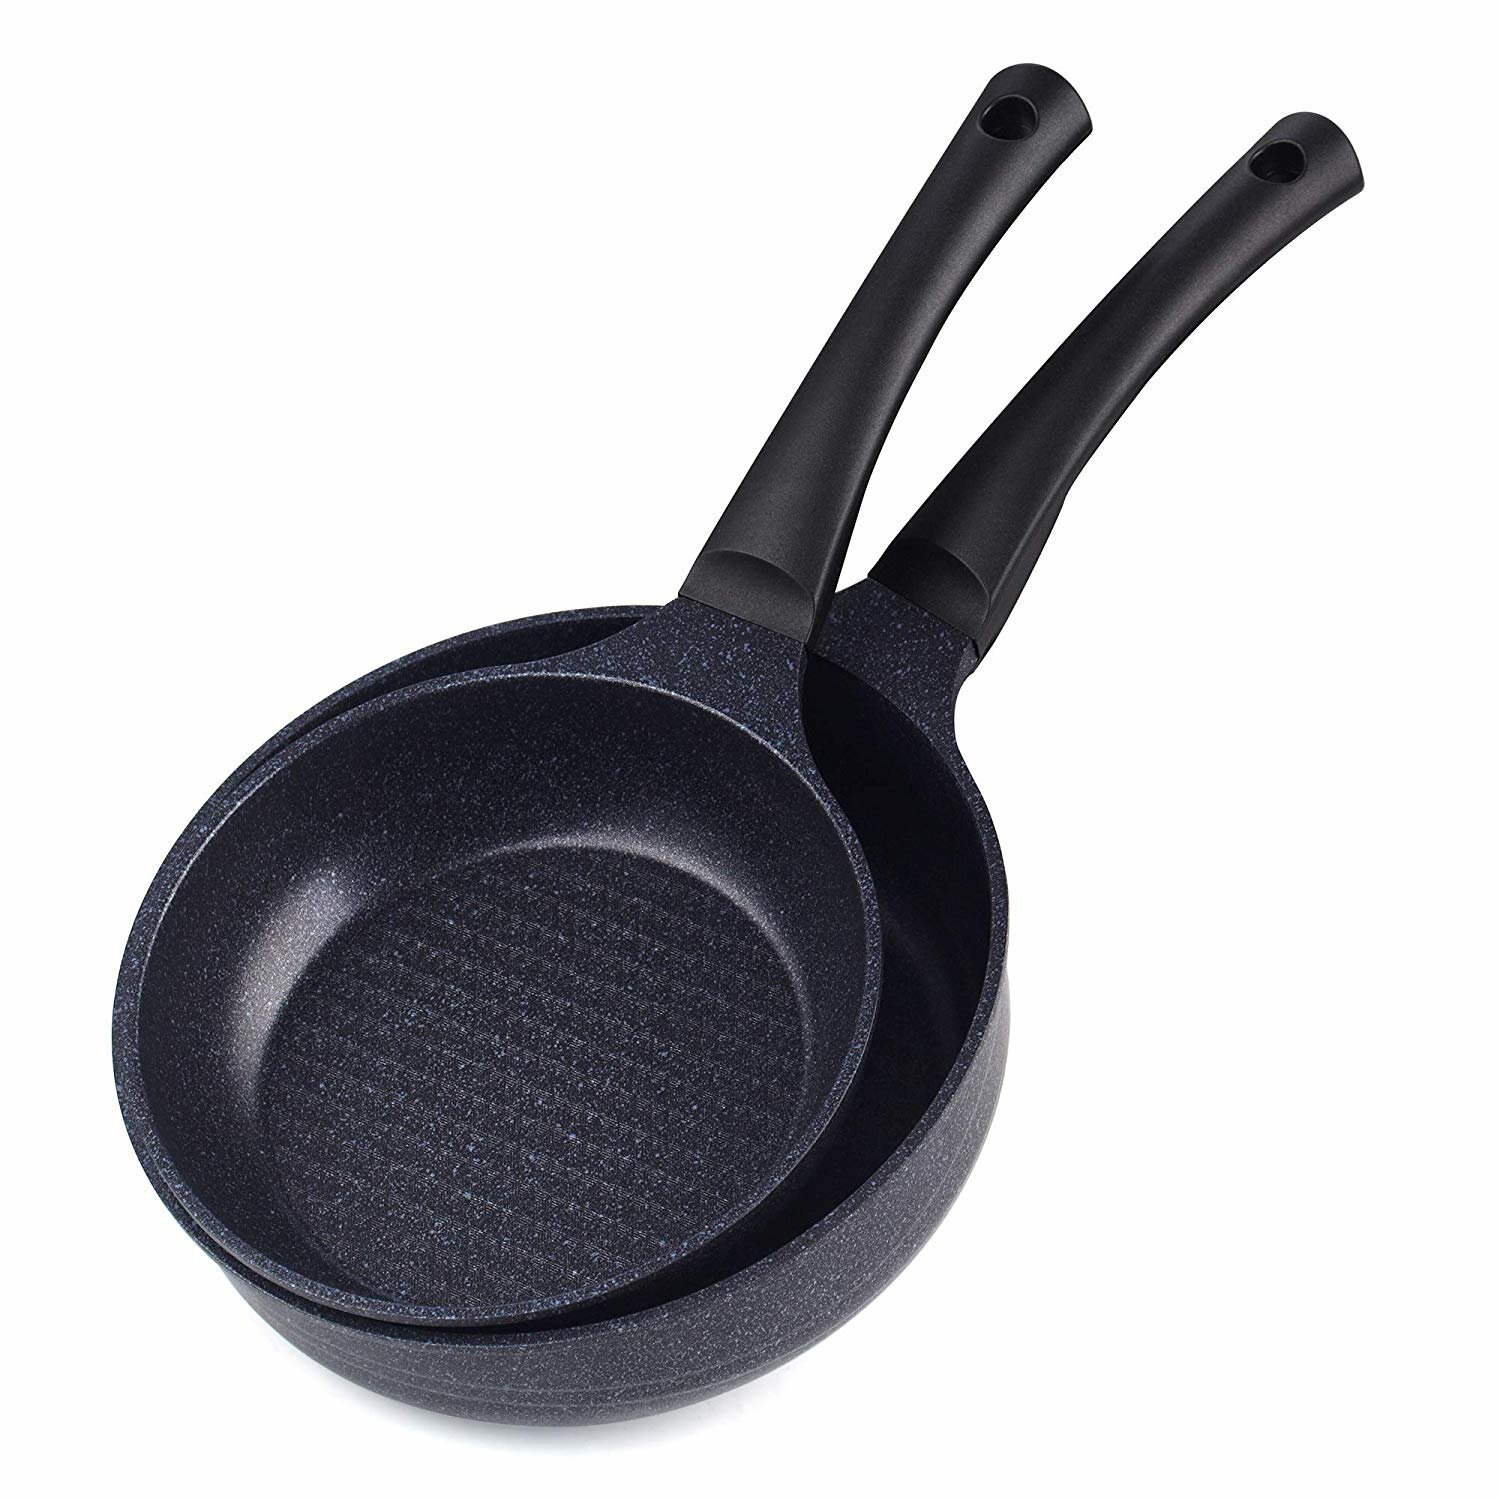 Cook N Home Hard Anodized Nonstick Saute Fry Pan 12 with Lid - Black